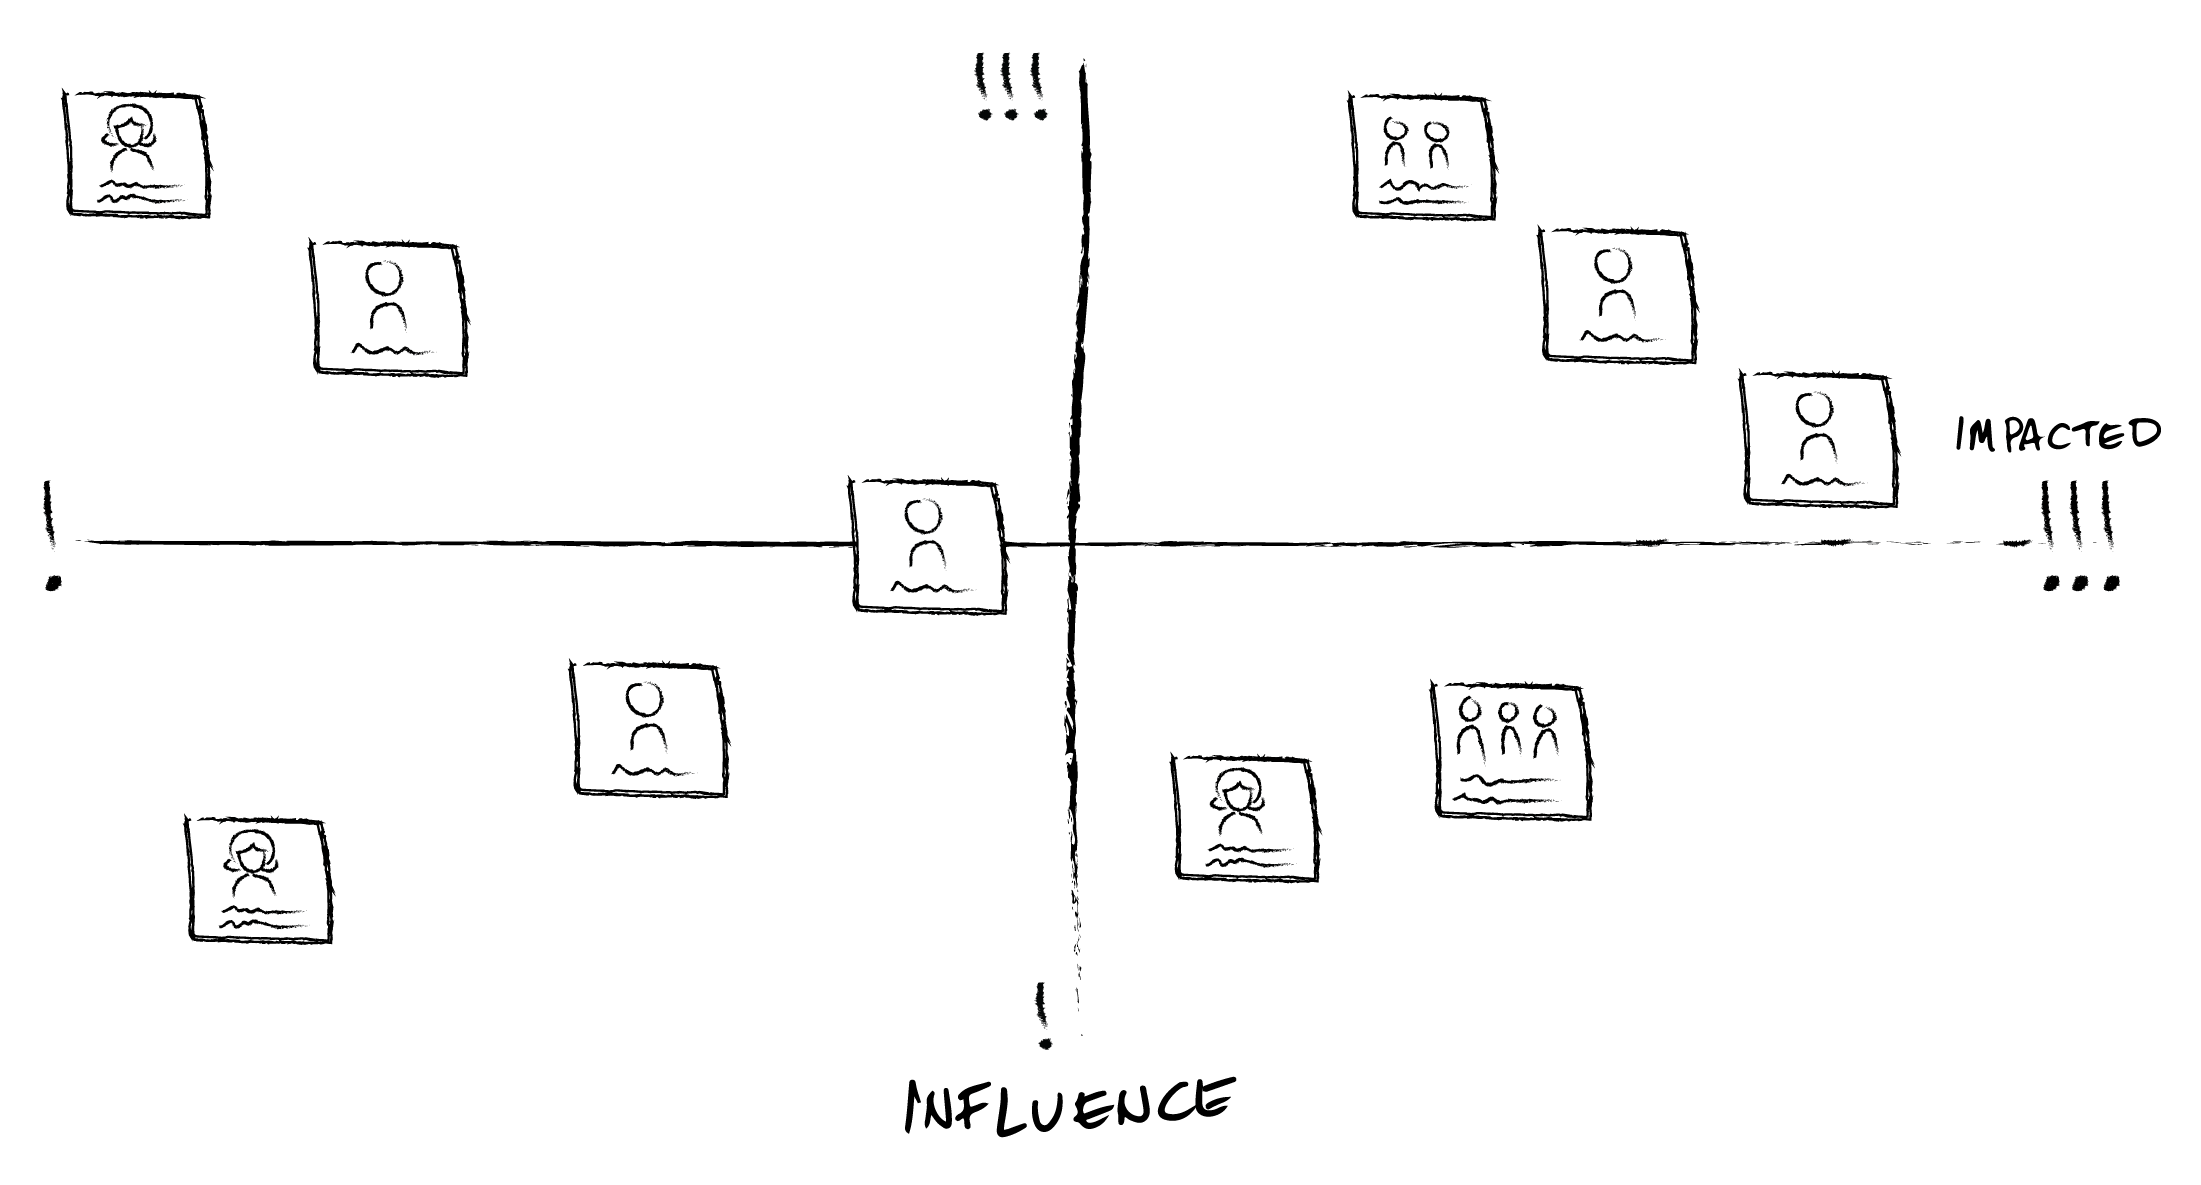 Sketch of Stakeholders in 4 axis quadrants